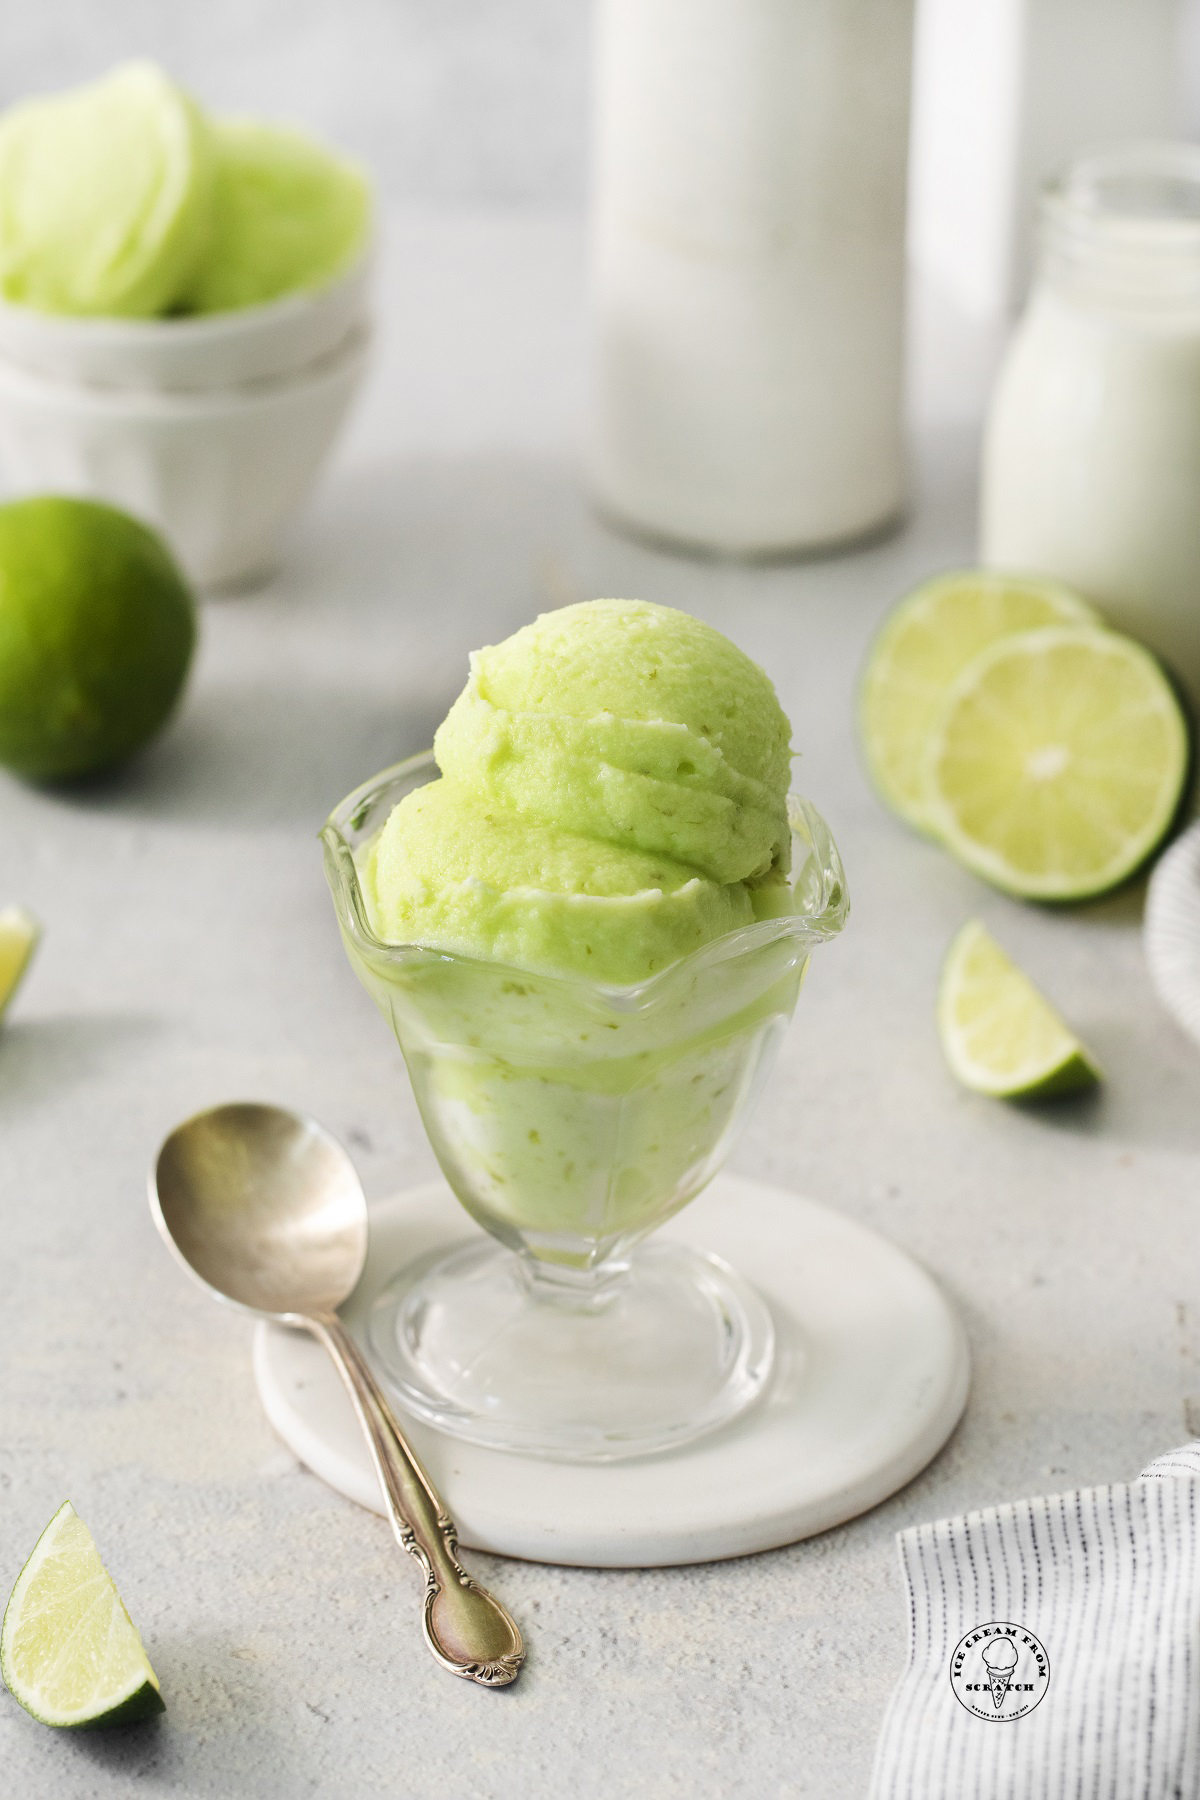 a footed glass ice cream dish filled with scoops of homemade lime sherbet. There is a silver spoon next to the dish and sliced limes in the background.